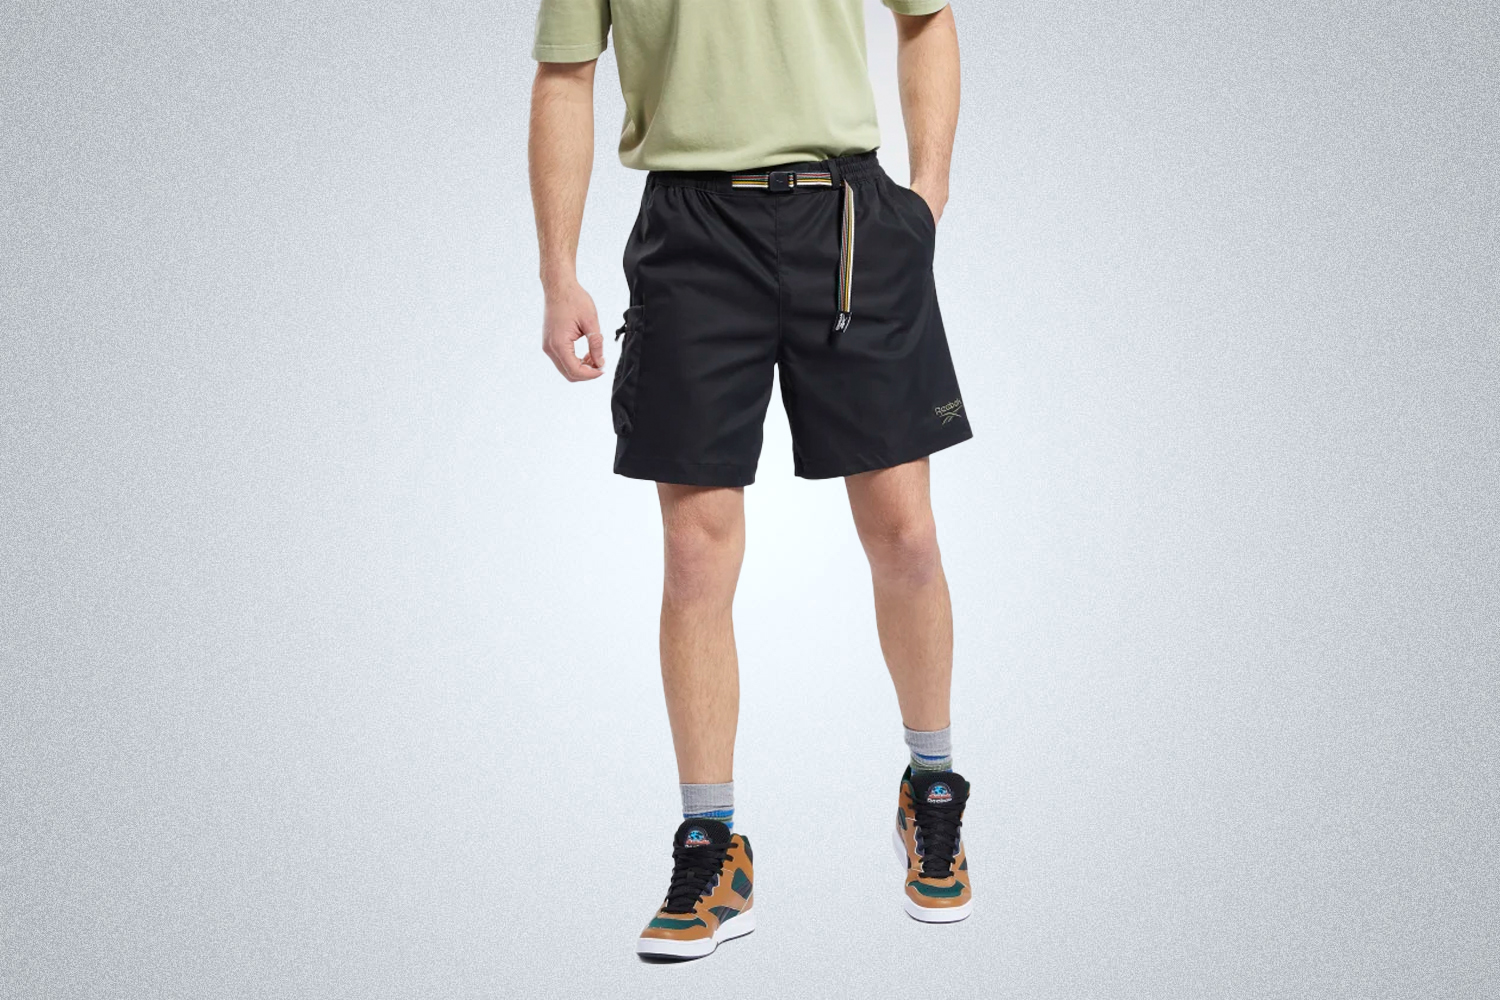 The Classics Camping Shorts from Reebok comes in two colors to match your outdoor style